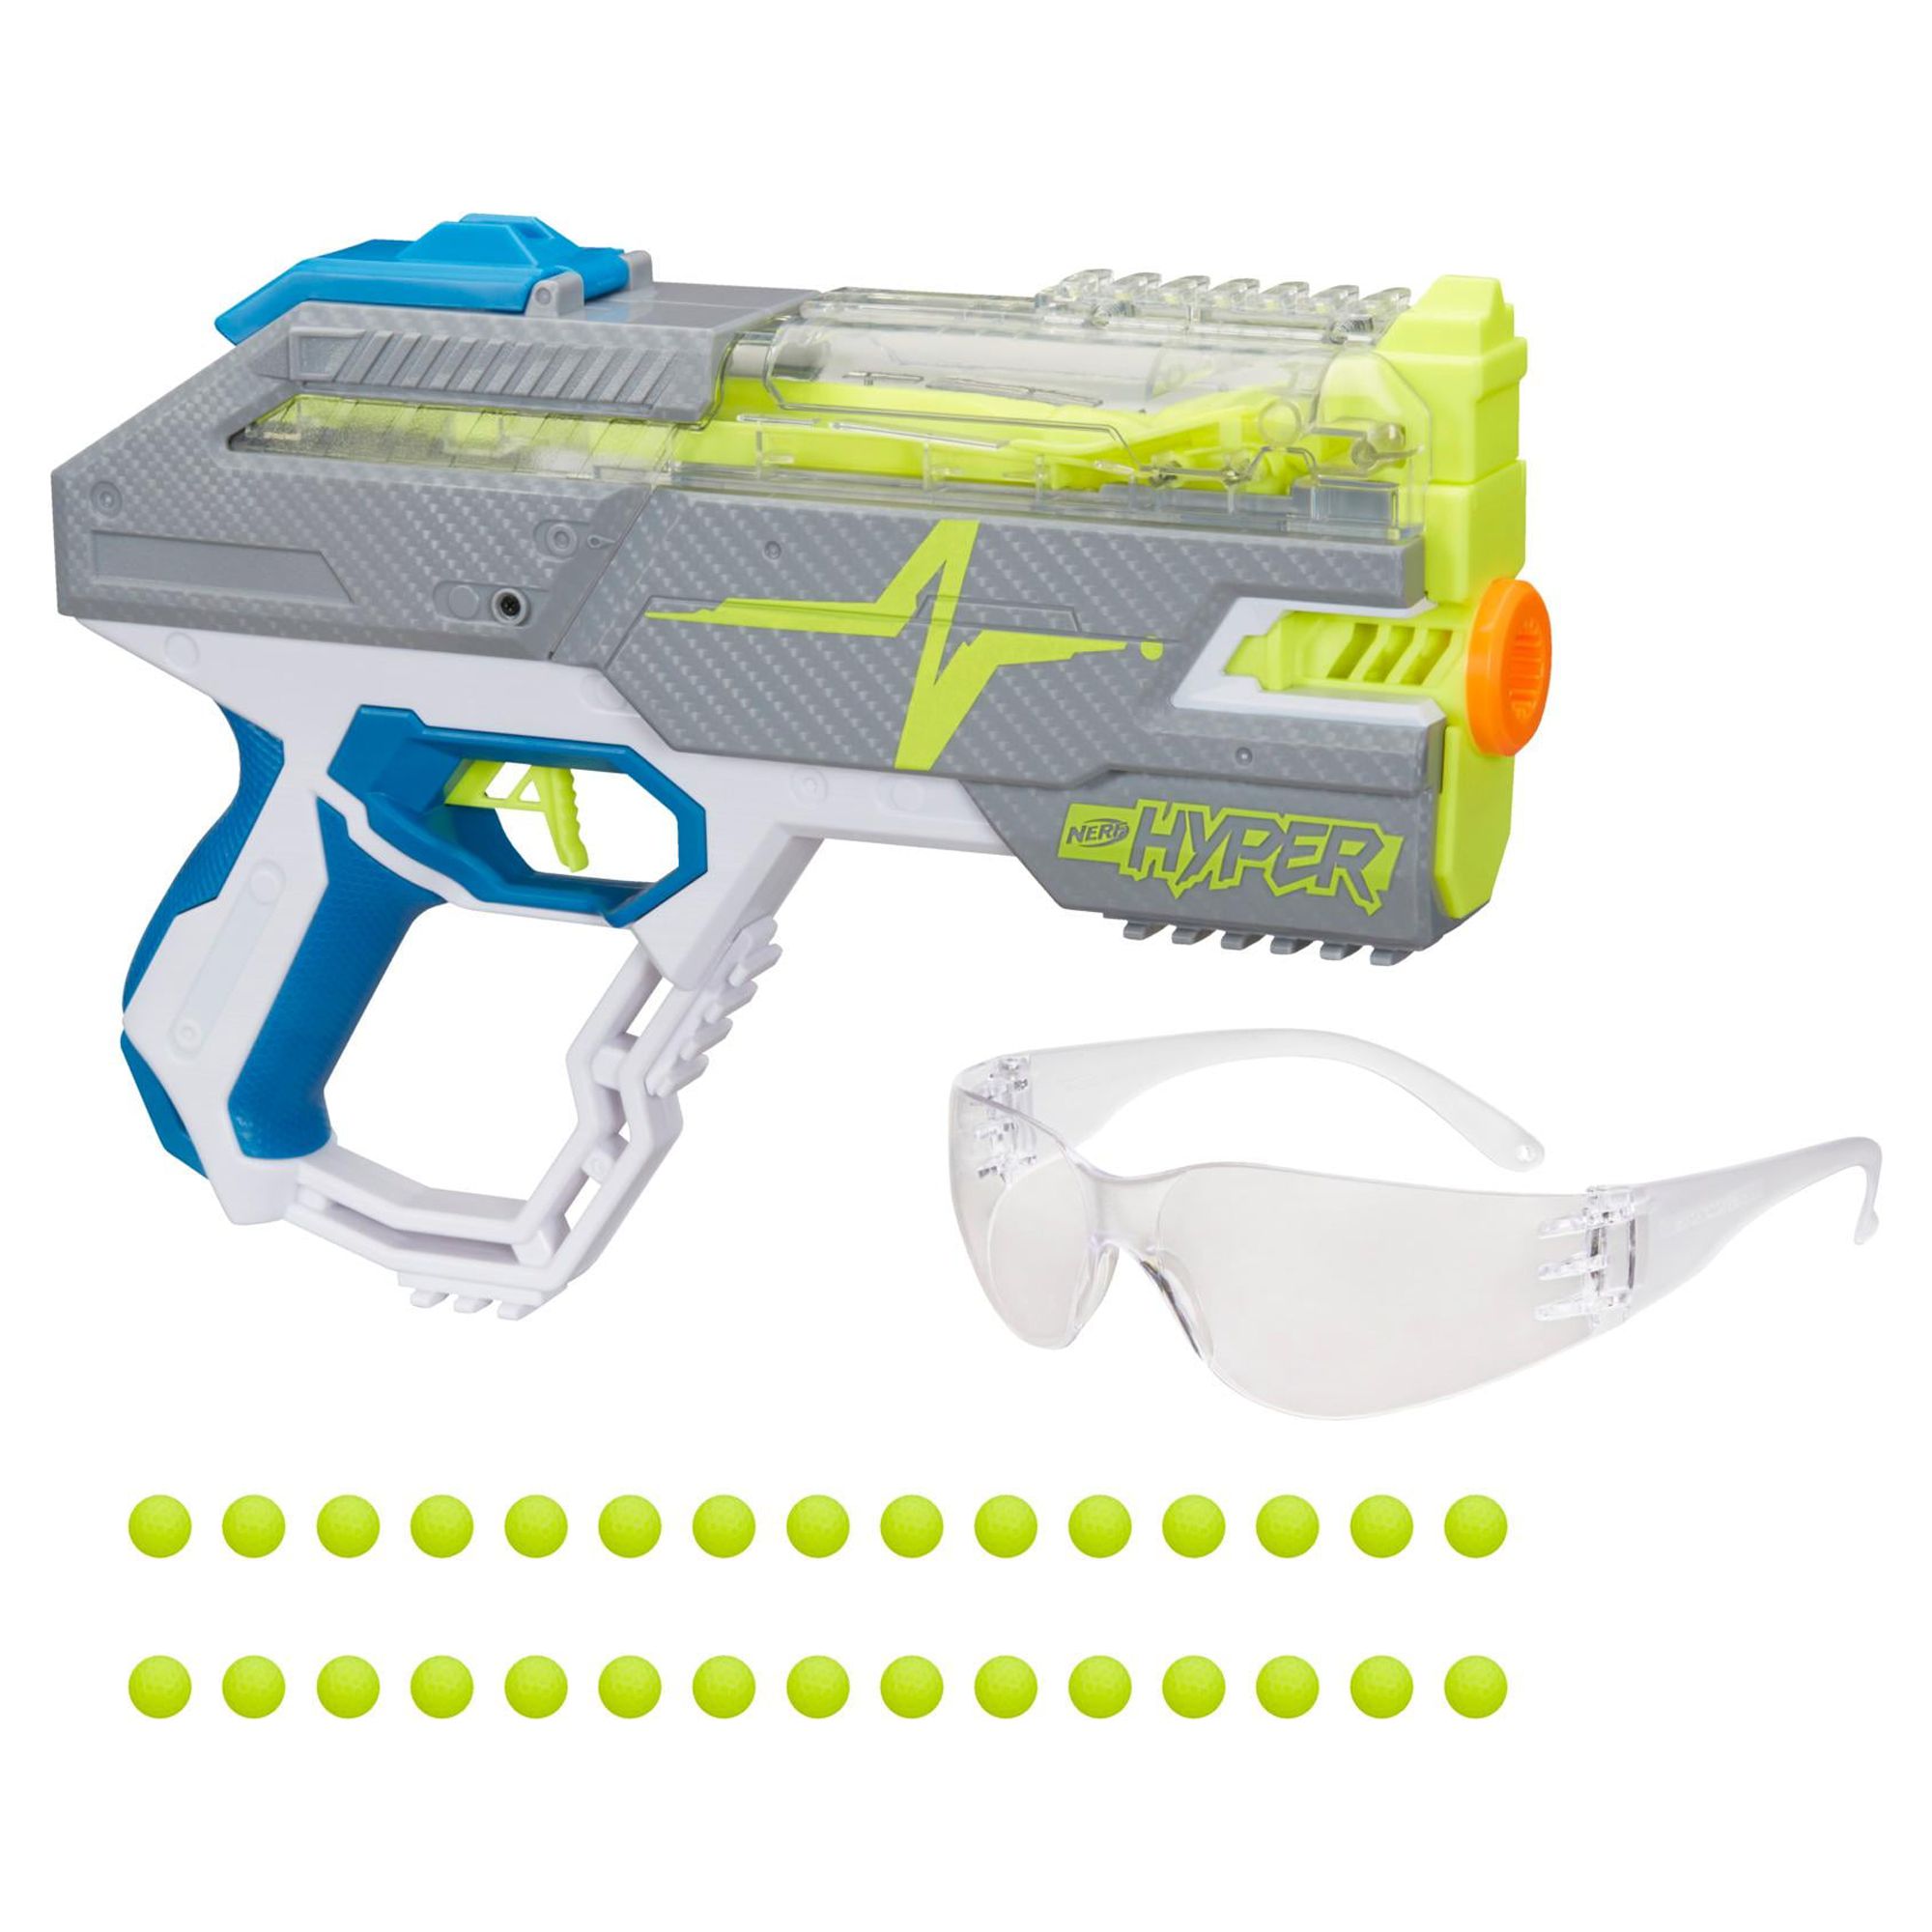 Nerf Hyper Rush-40 Pump-Action Blaster and 30 Nerf Hyper Rounds, 110 FPS Velocity, Easy Reload, 40-Round Capacity - image 1 of 8